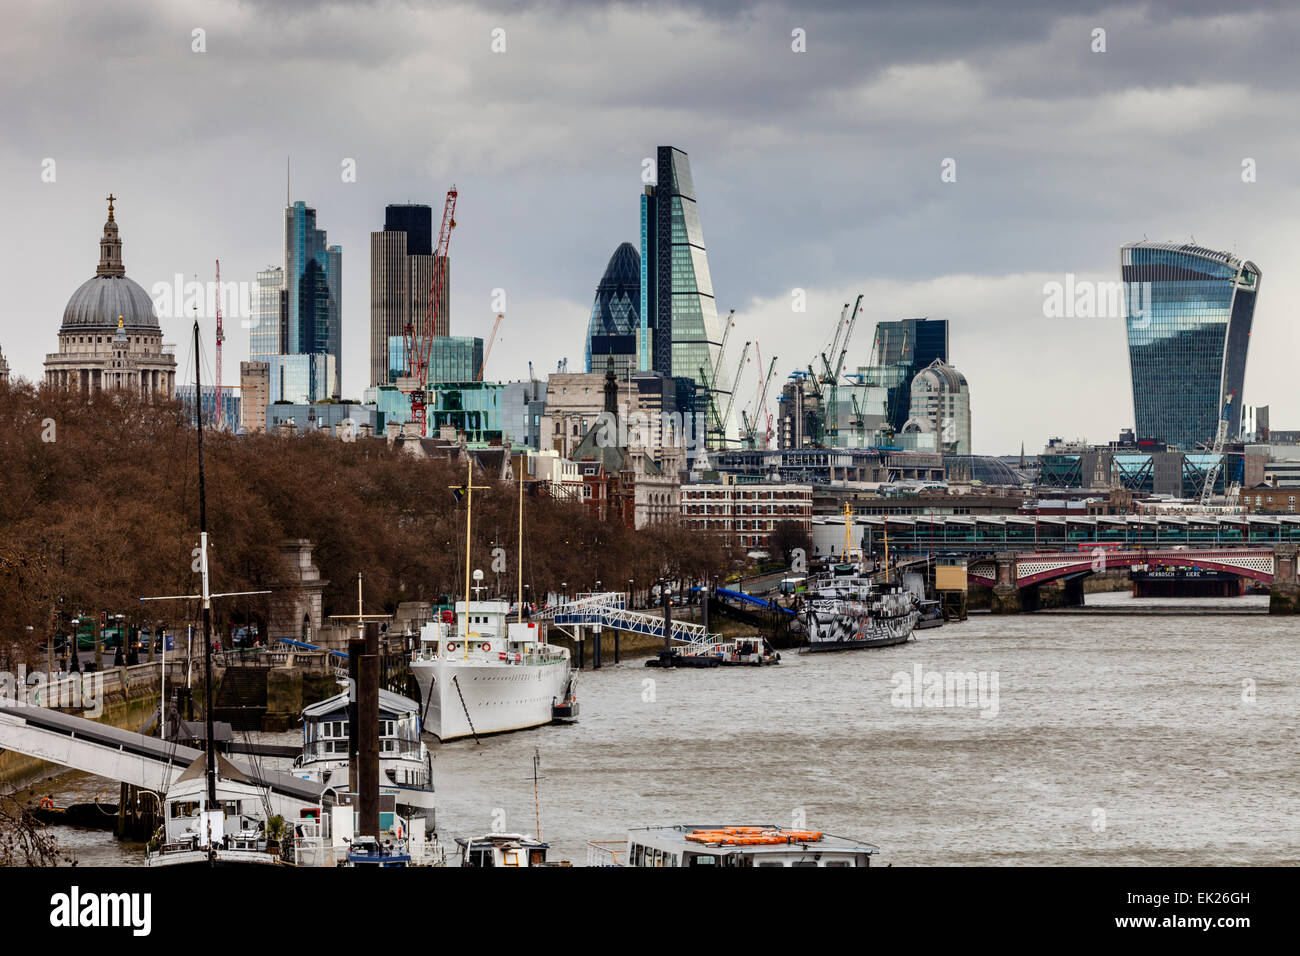 The River Thames and City Of London Skyline, London, England Stock Photo